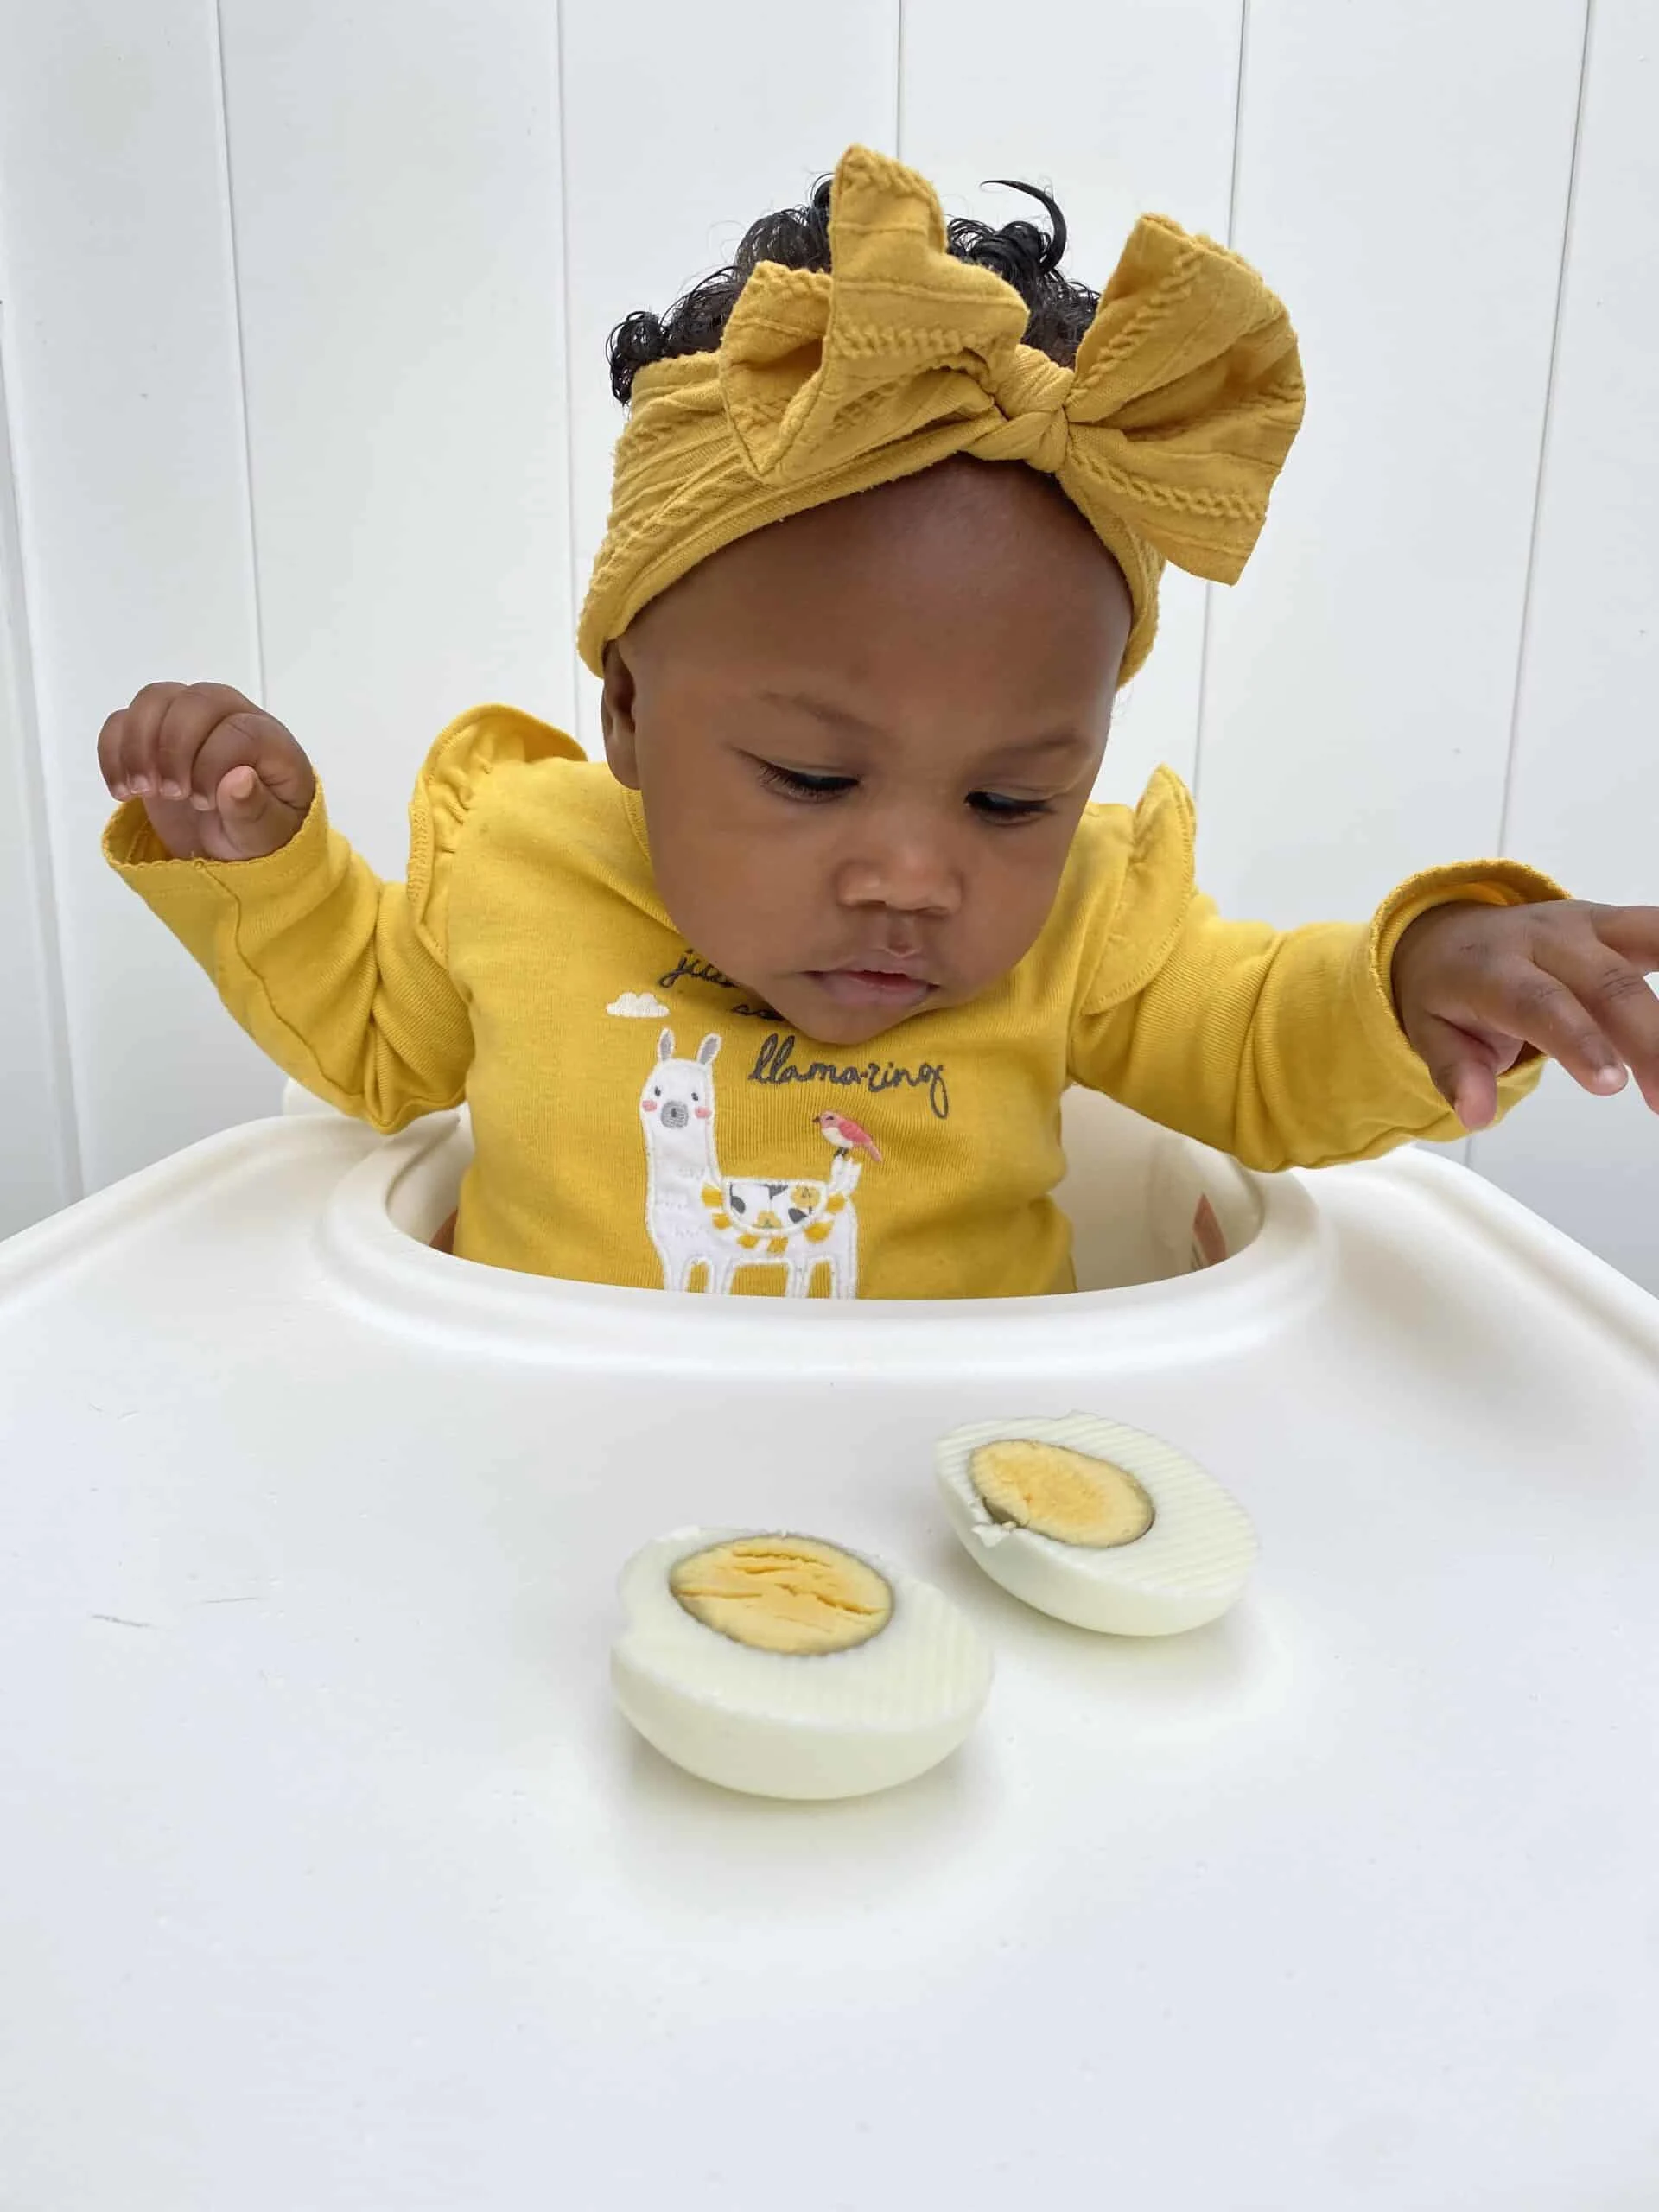 a baby wearing a yellow shirt and headband looks at a hard boiled egg cut in half